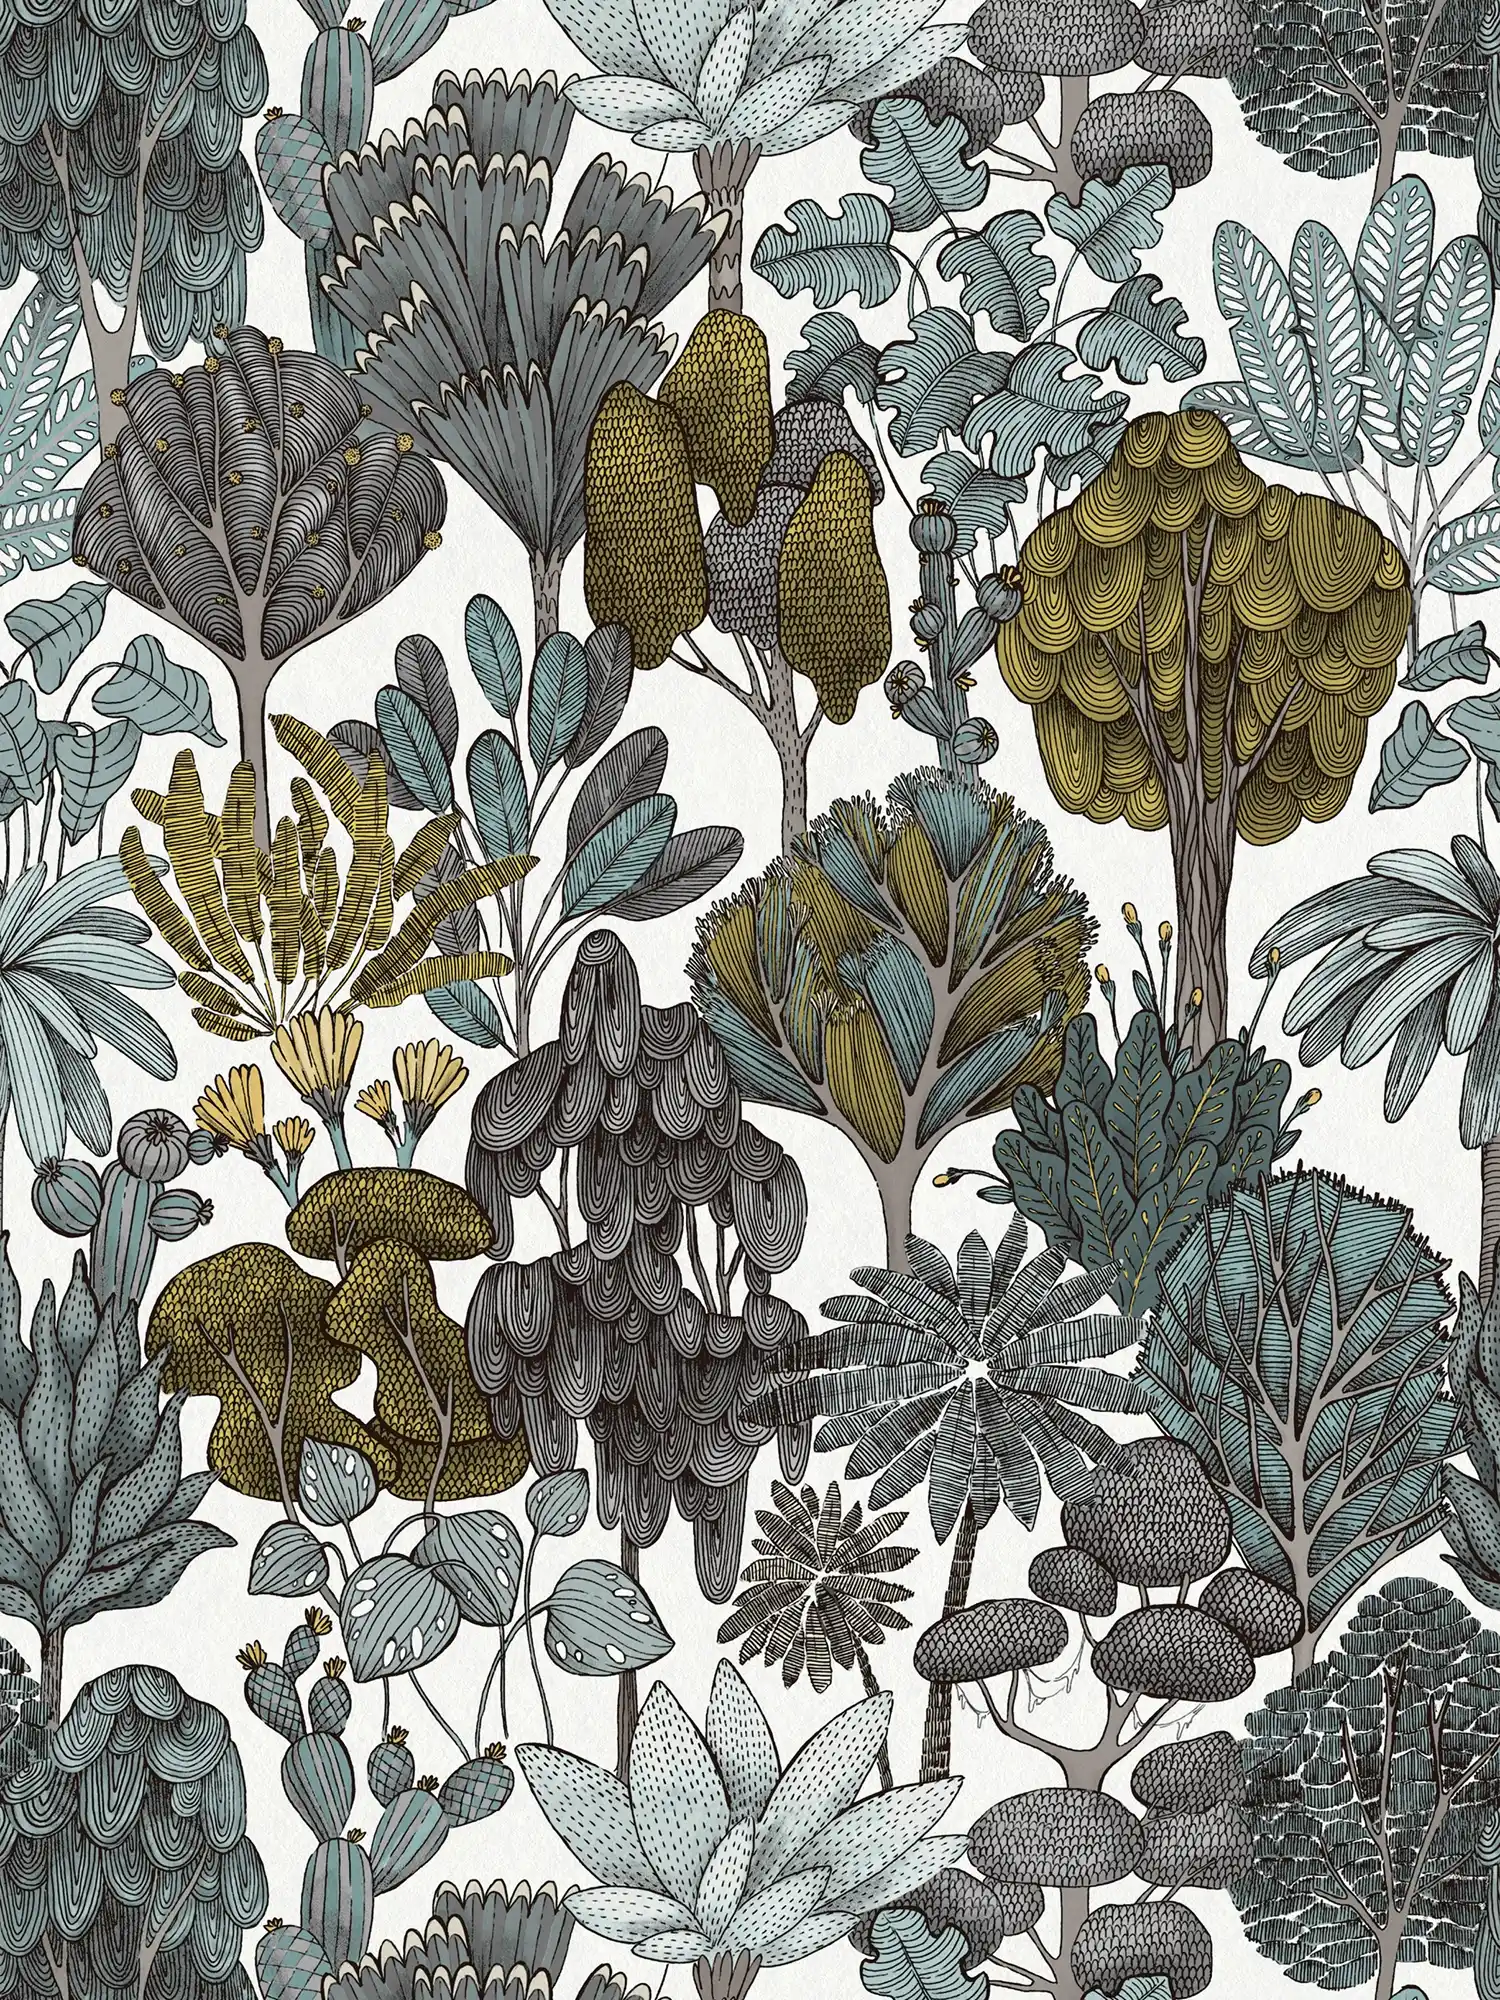 wallpaper green grey floral pattern in doodle style - green, grey, yellow
